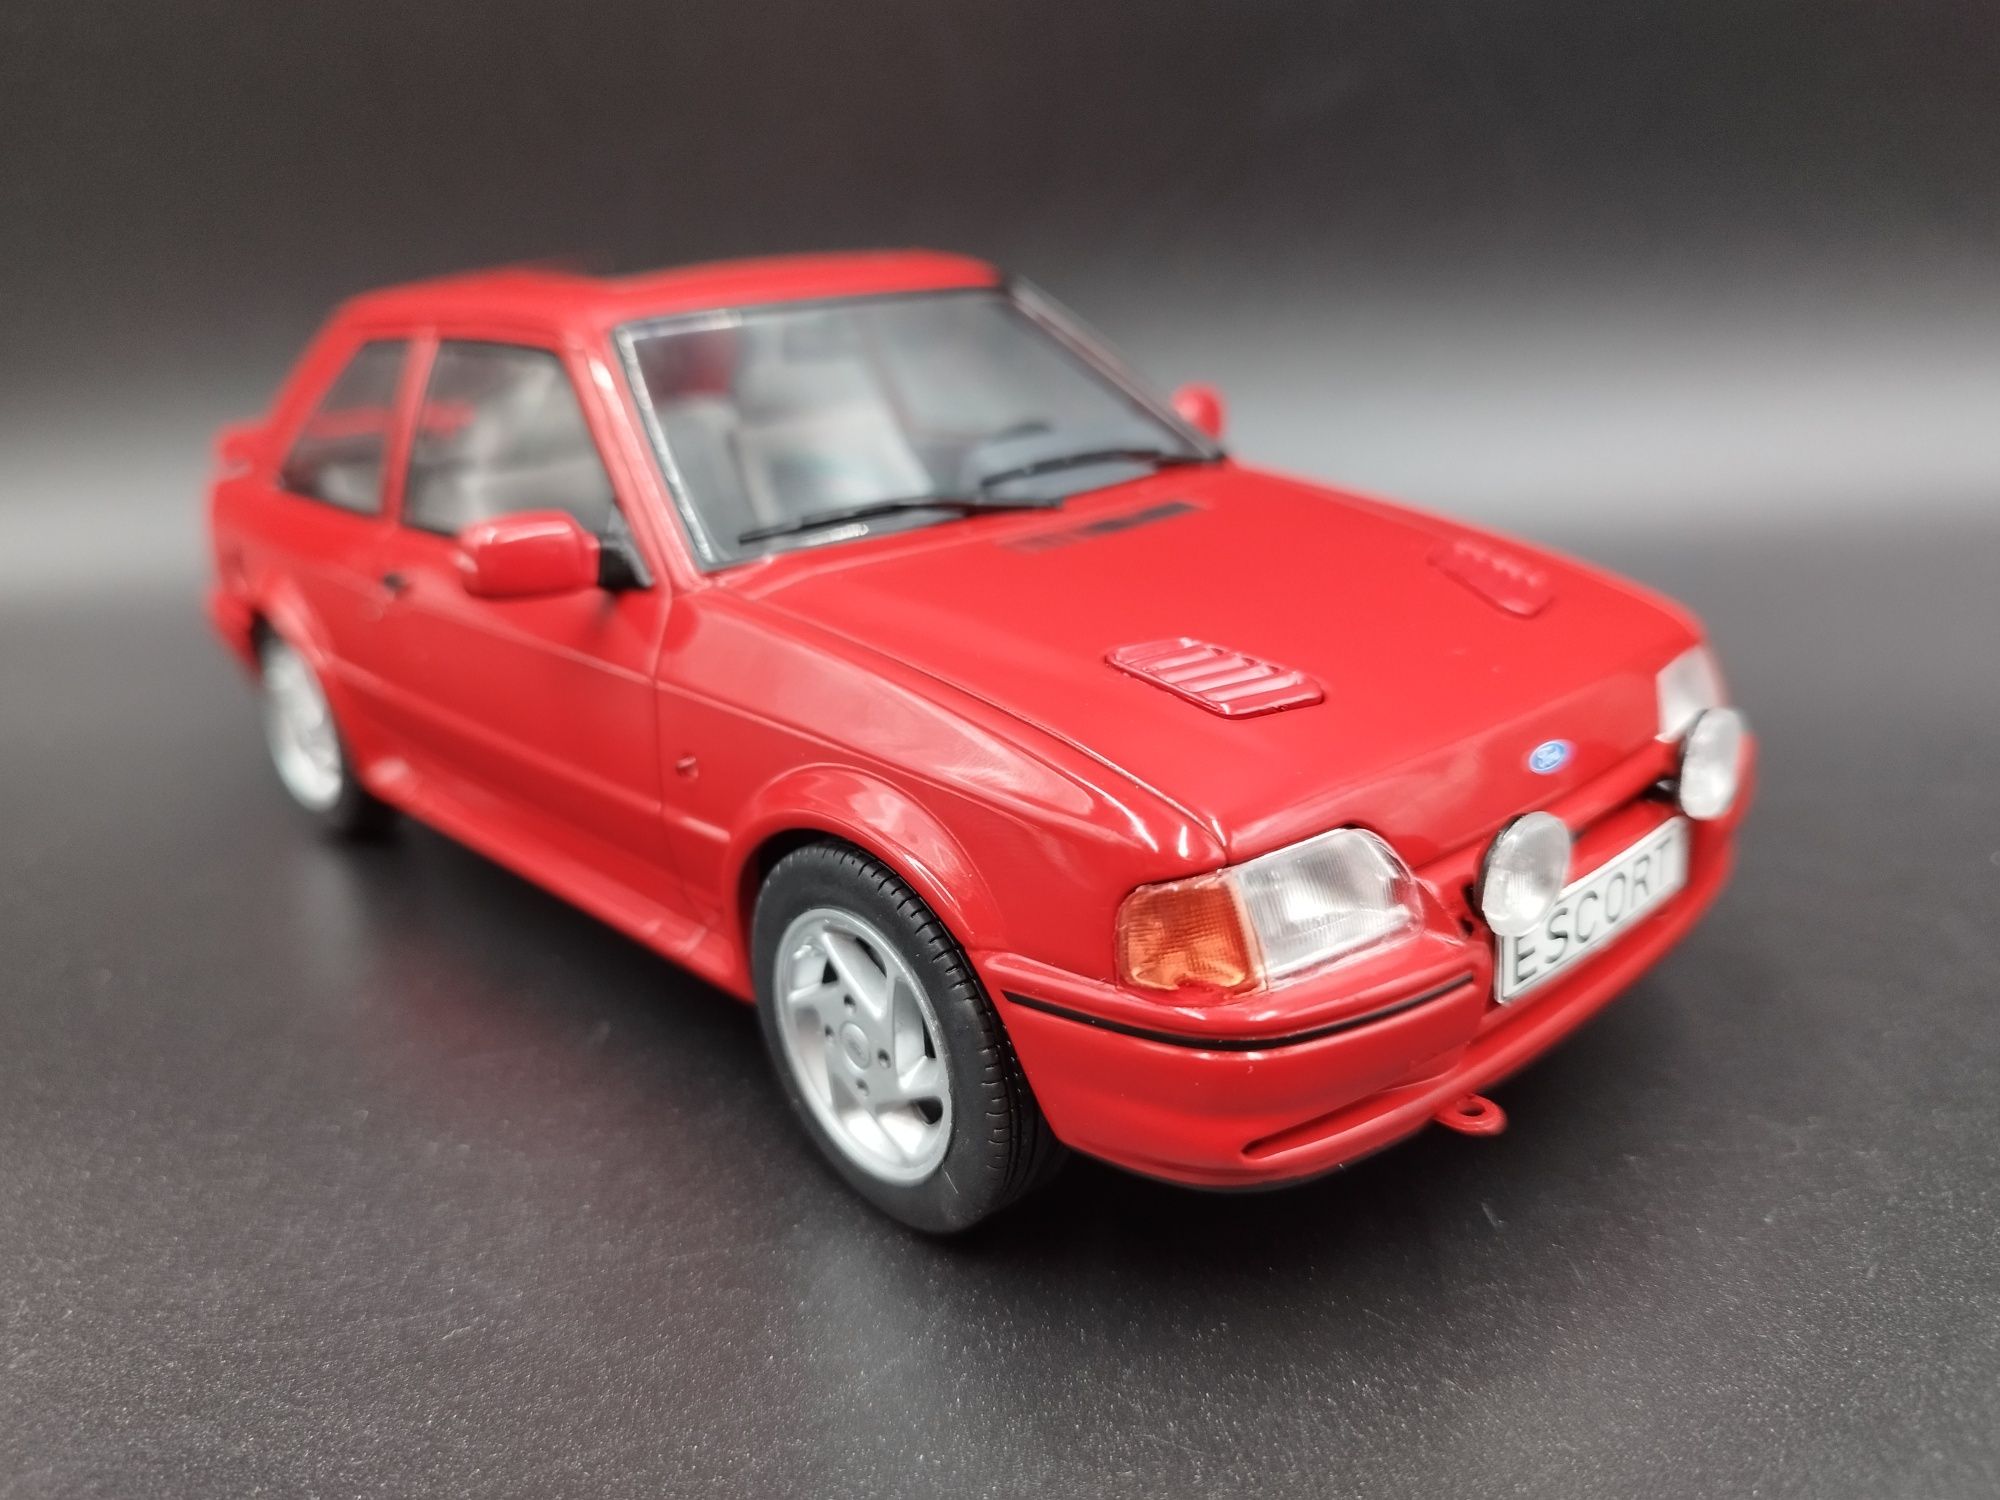 1:18 MCG Ford Escort  RS Turbo S2 Red model  nowy